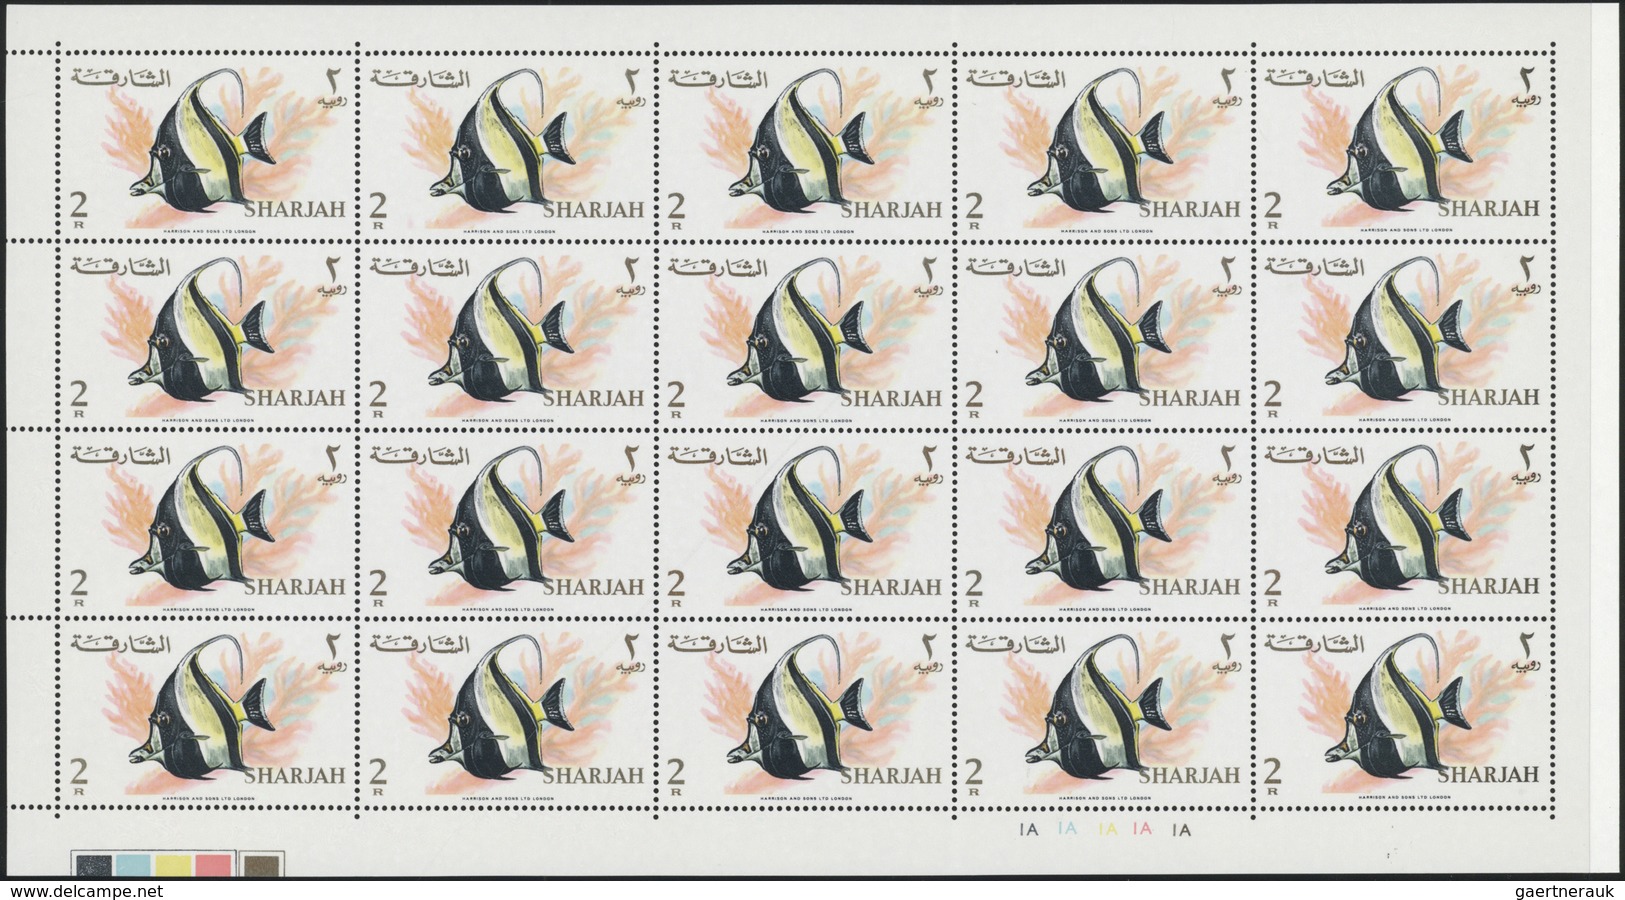 ** Schardscha / Sharjah: 1966, Fishes, 1np. to 10r., complete set of 17 values as (folded) sheets of 20